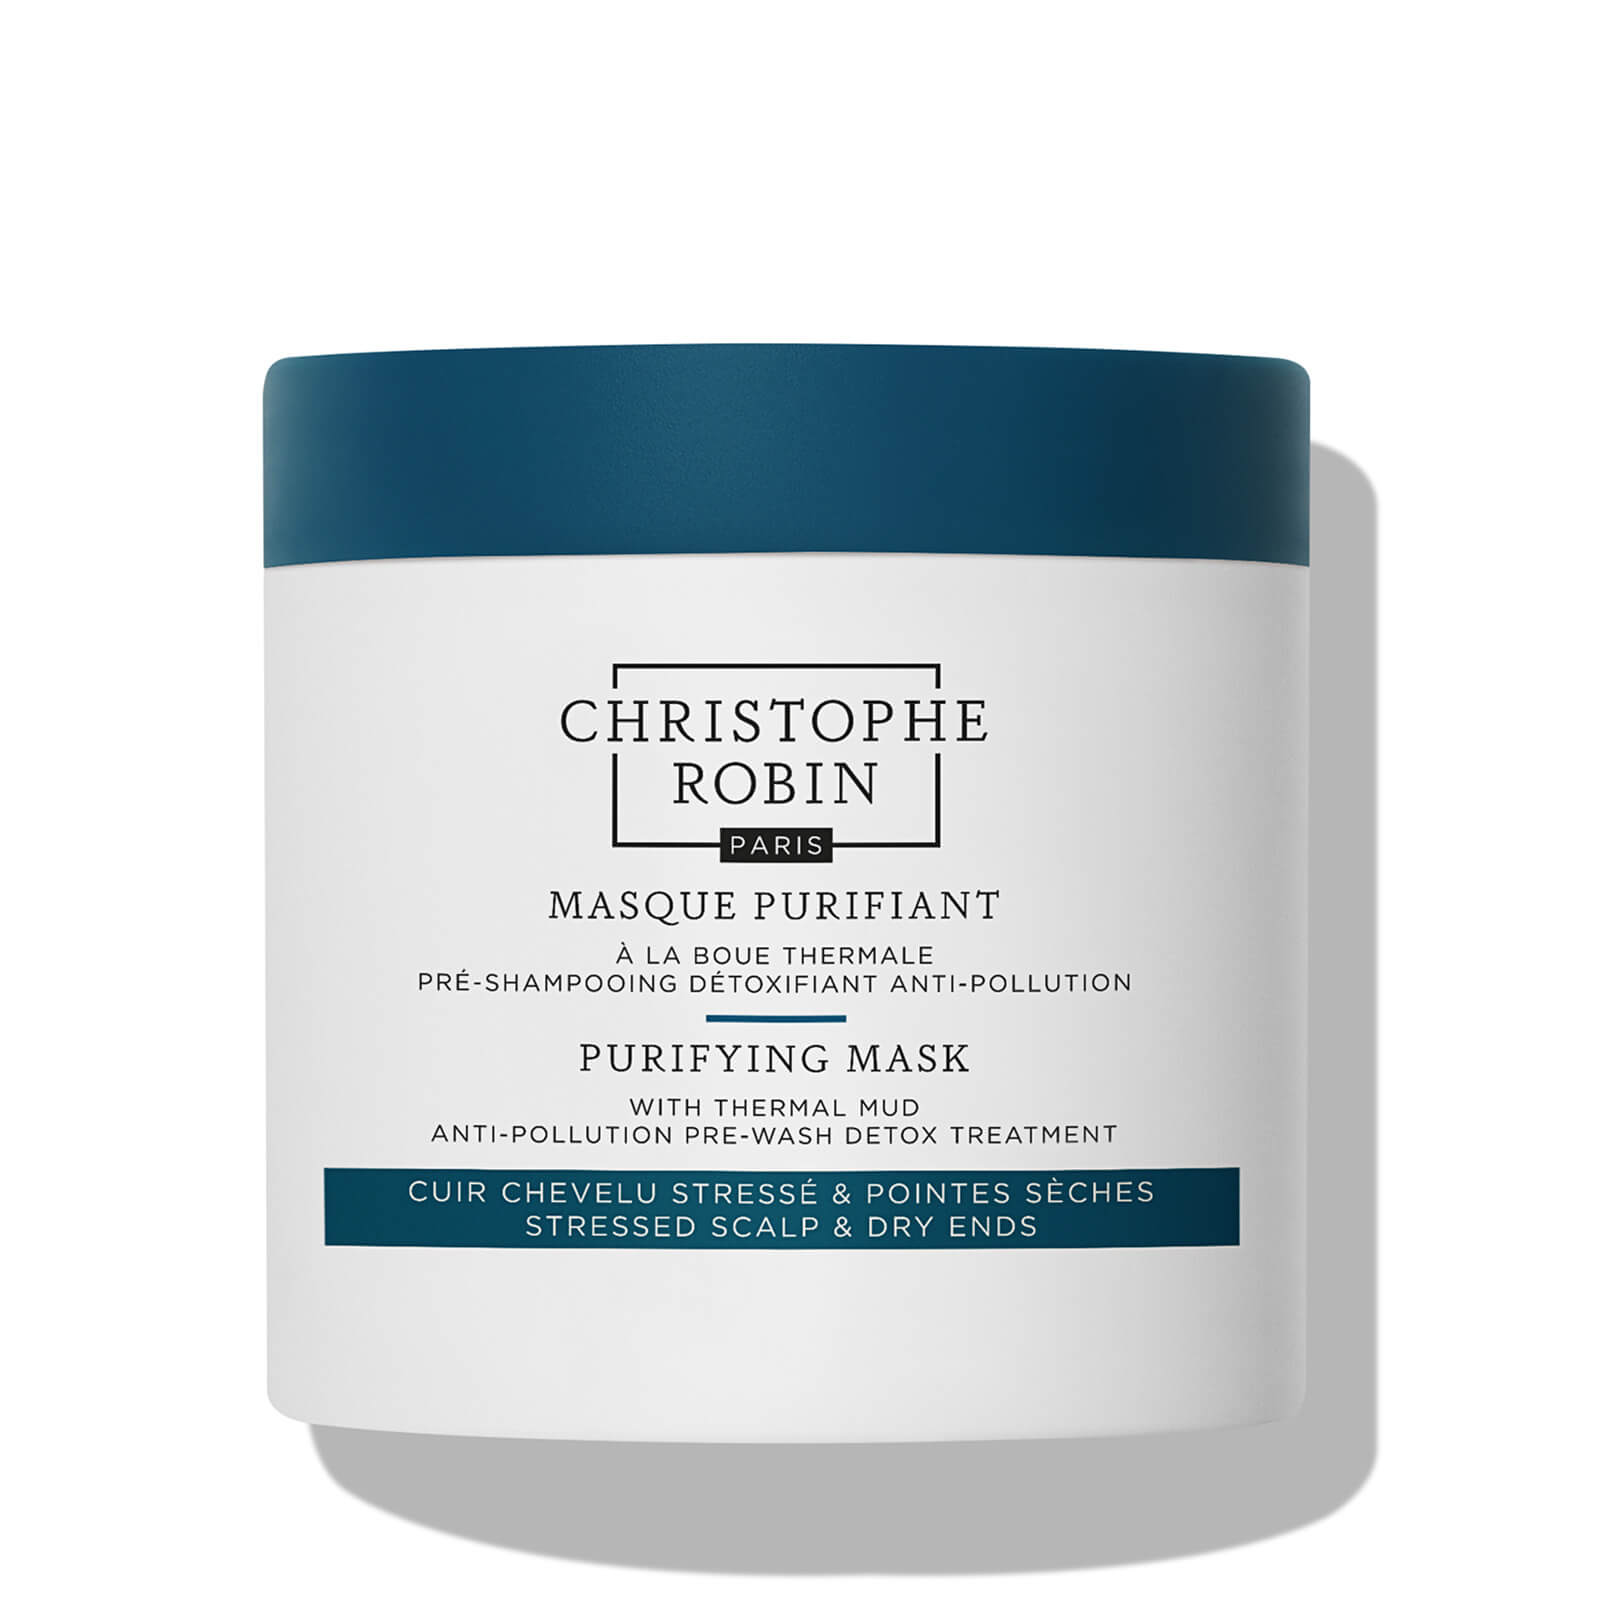 Christophe Robin Purifying Mask with Thermal Mud 250ml von Christophe Robin